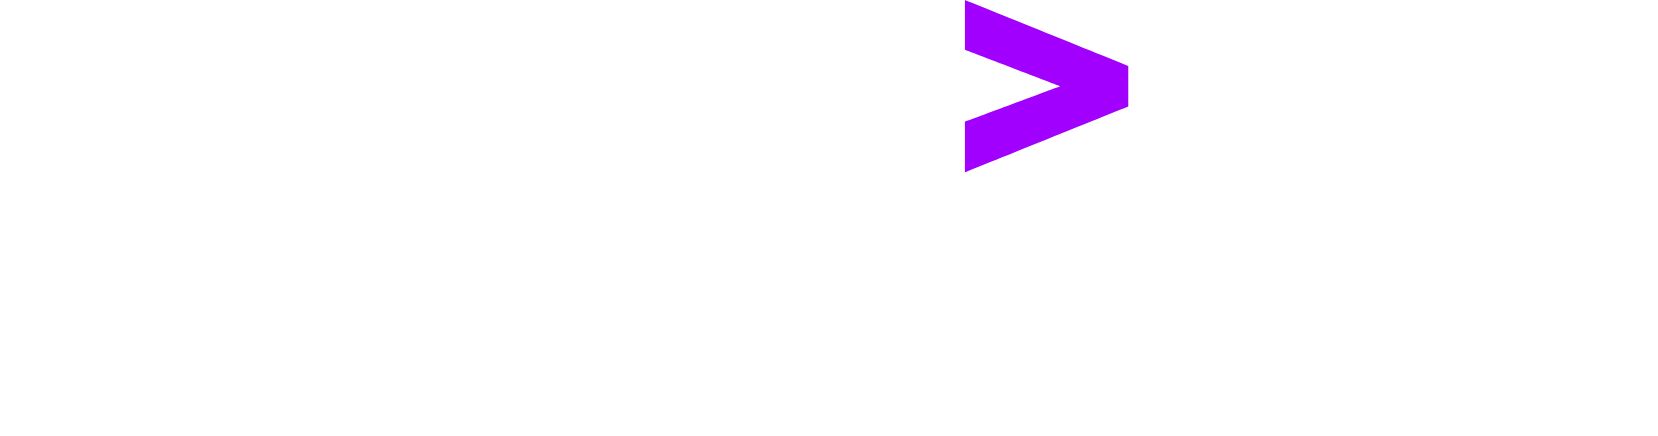 accenture logo png